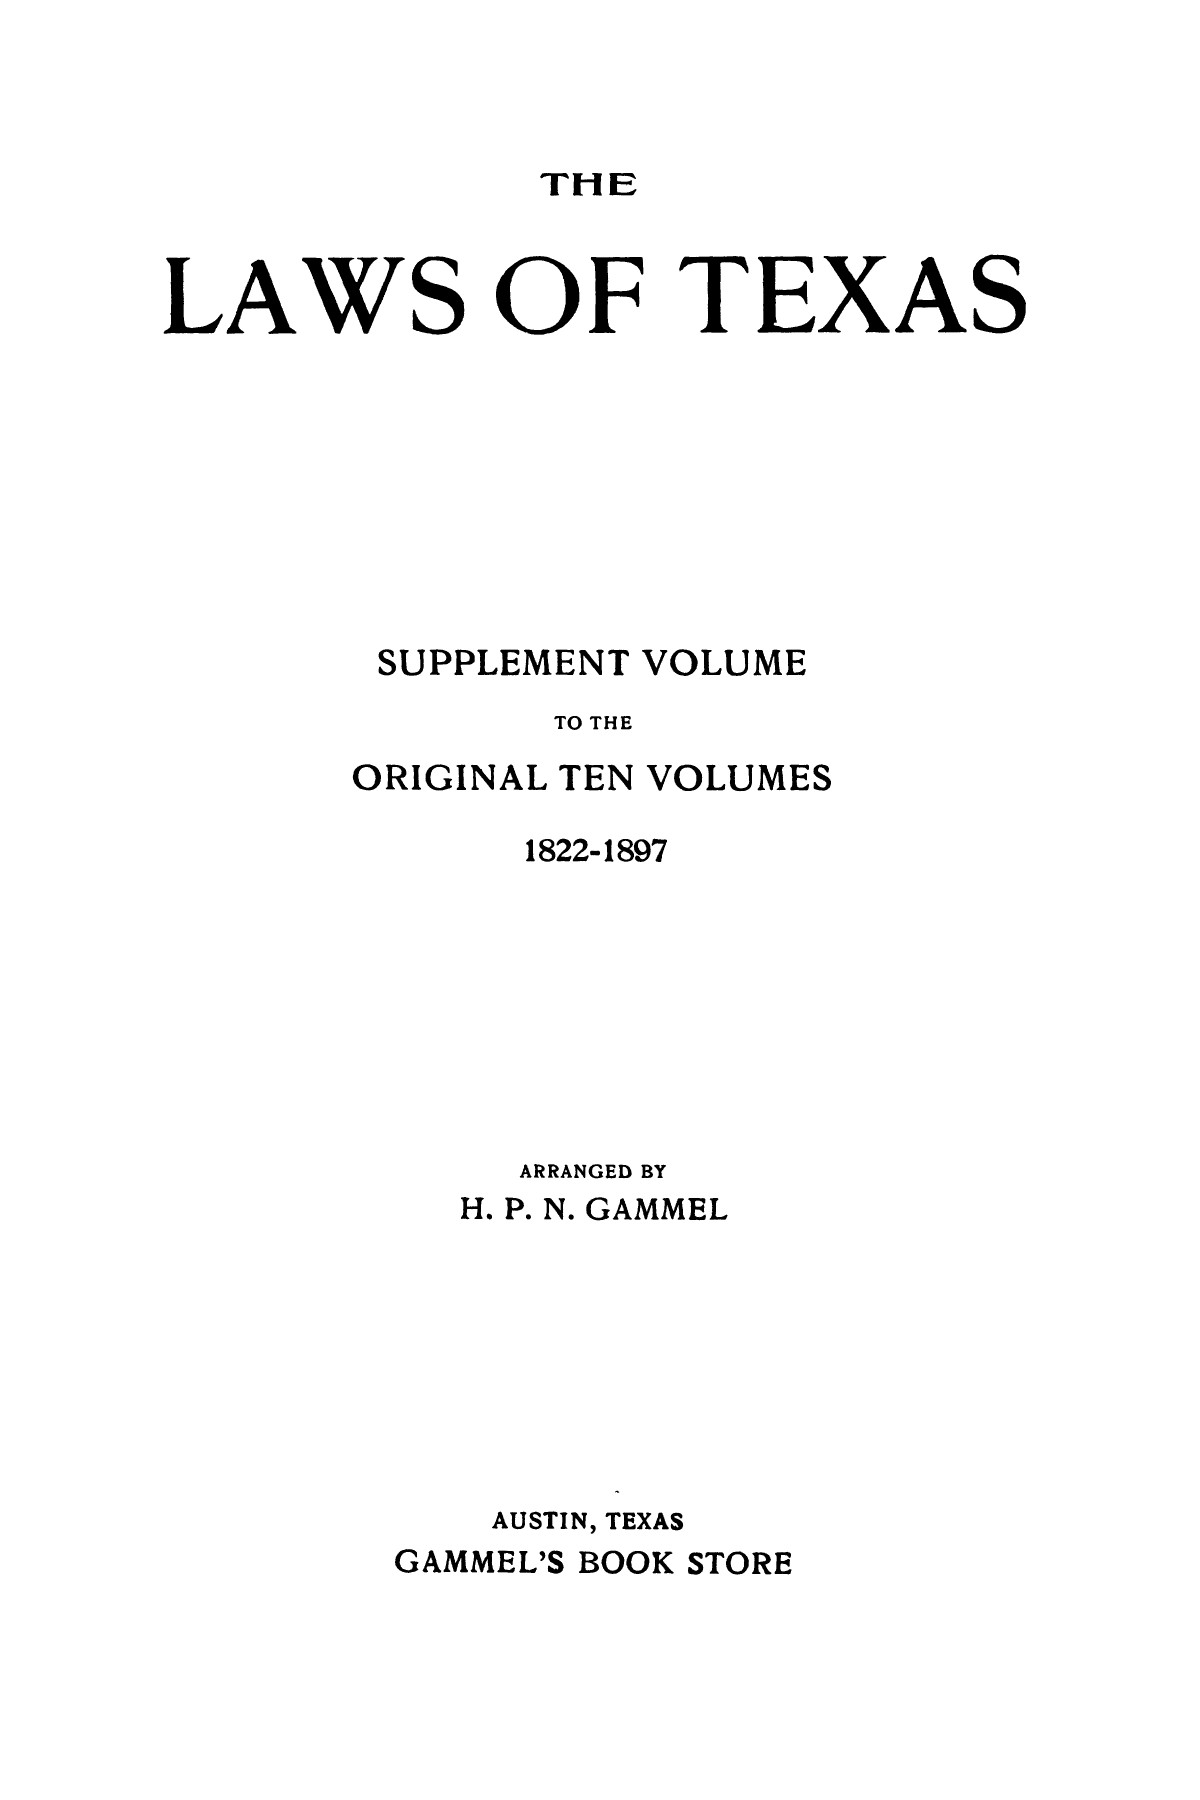 The Laws of Texas, 1919 [Volume 19]
                                                
                                                    [Sequence #]: 1 of 1570
                                                